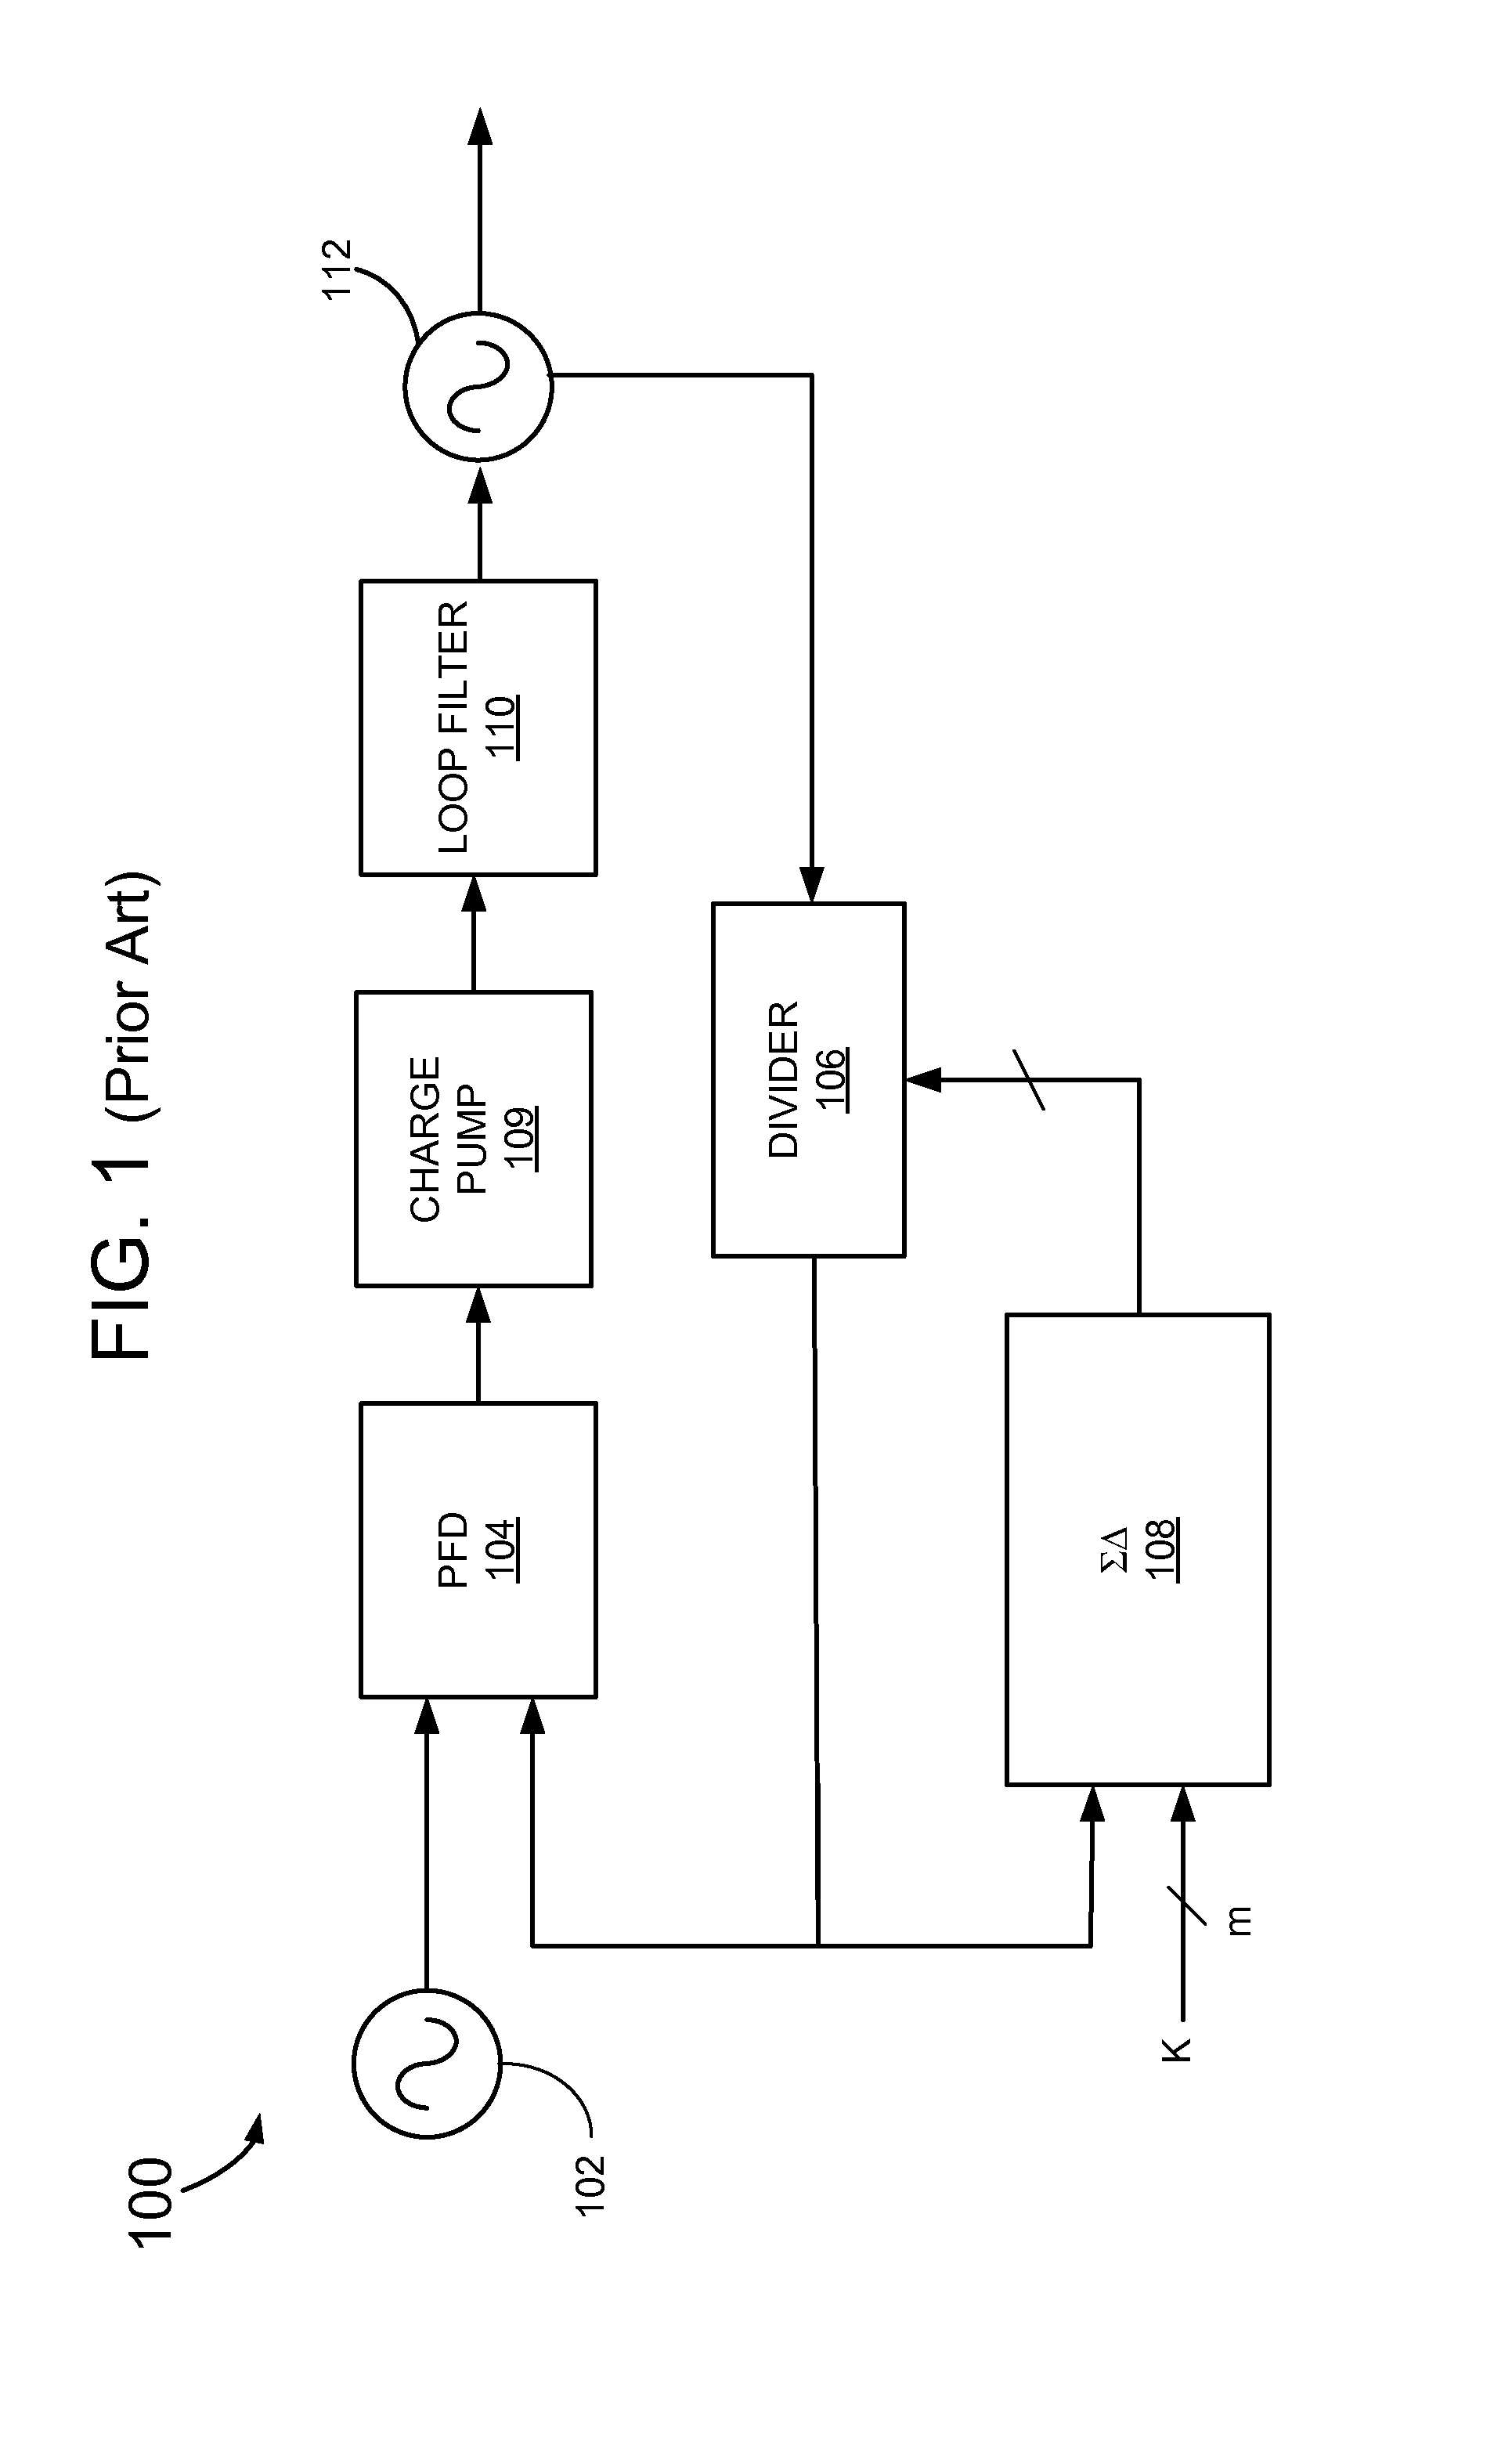 Frequency divider with improved linearity for a fractional-n synthesizer using a multi-modulus prescaler